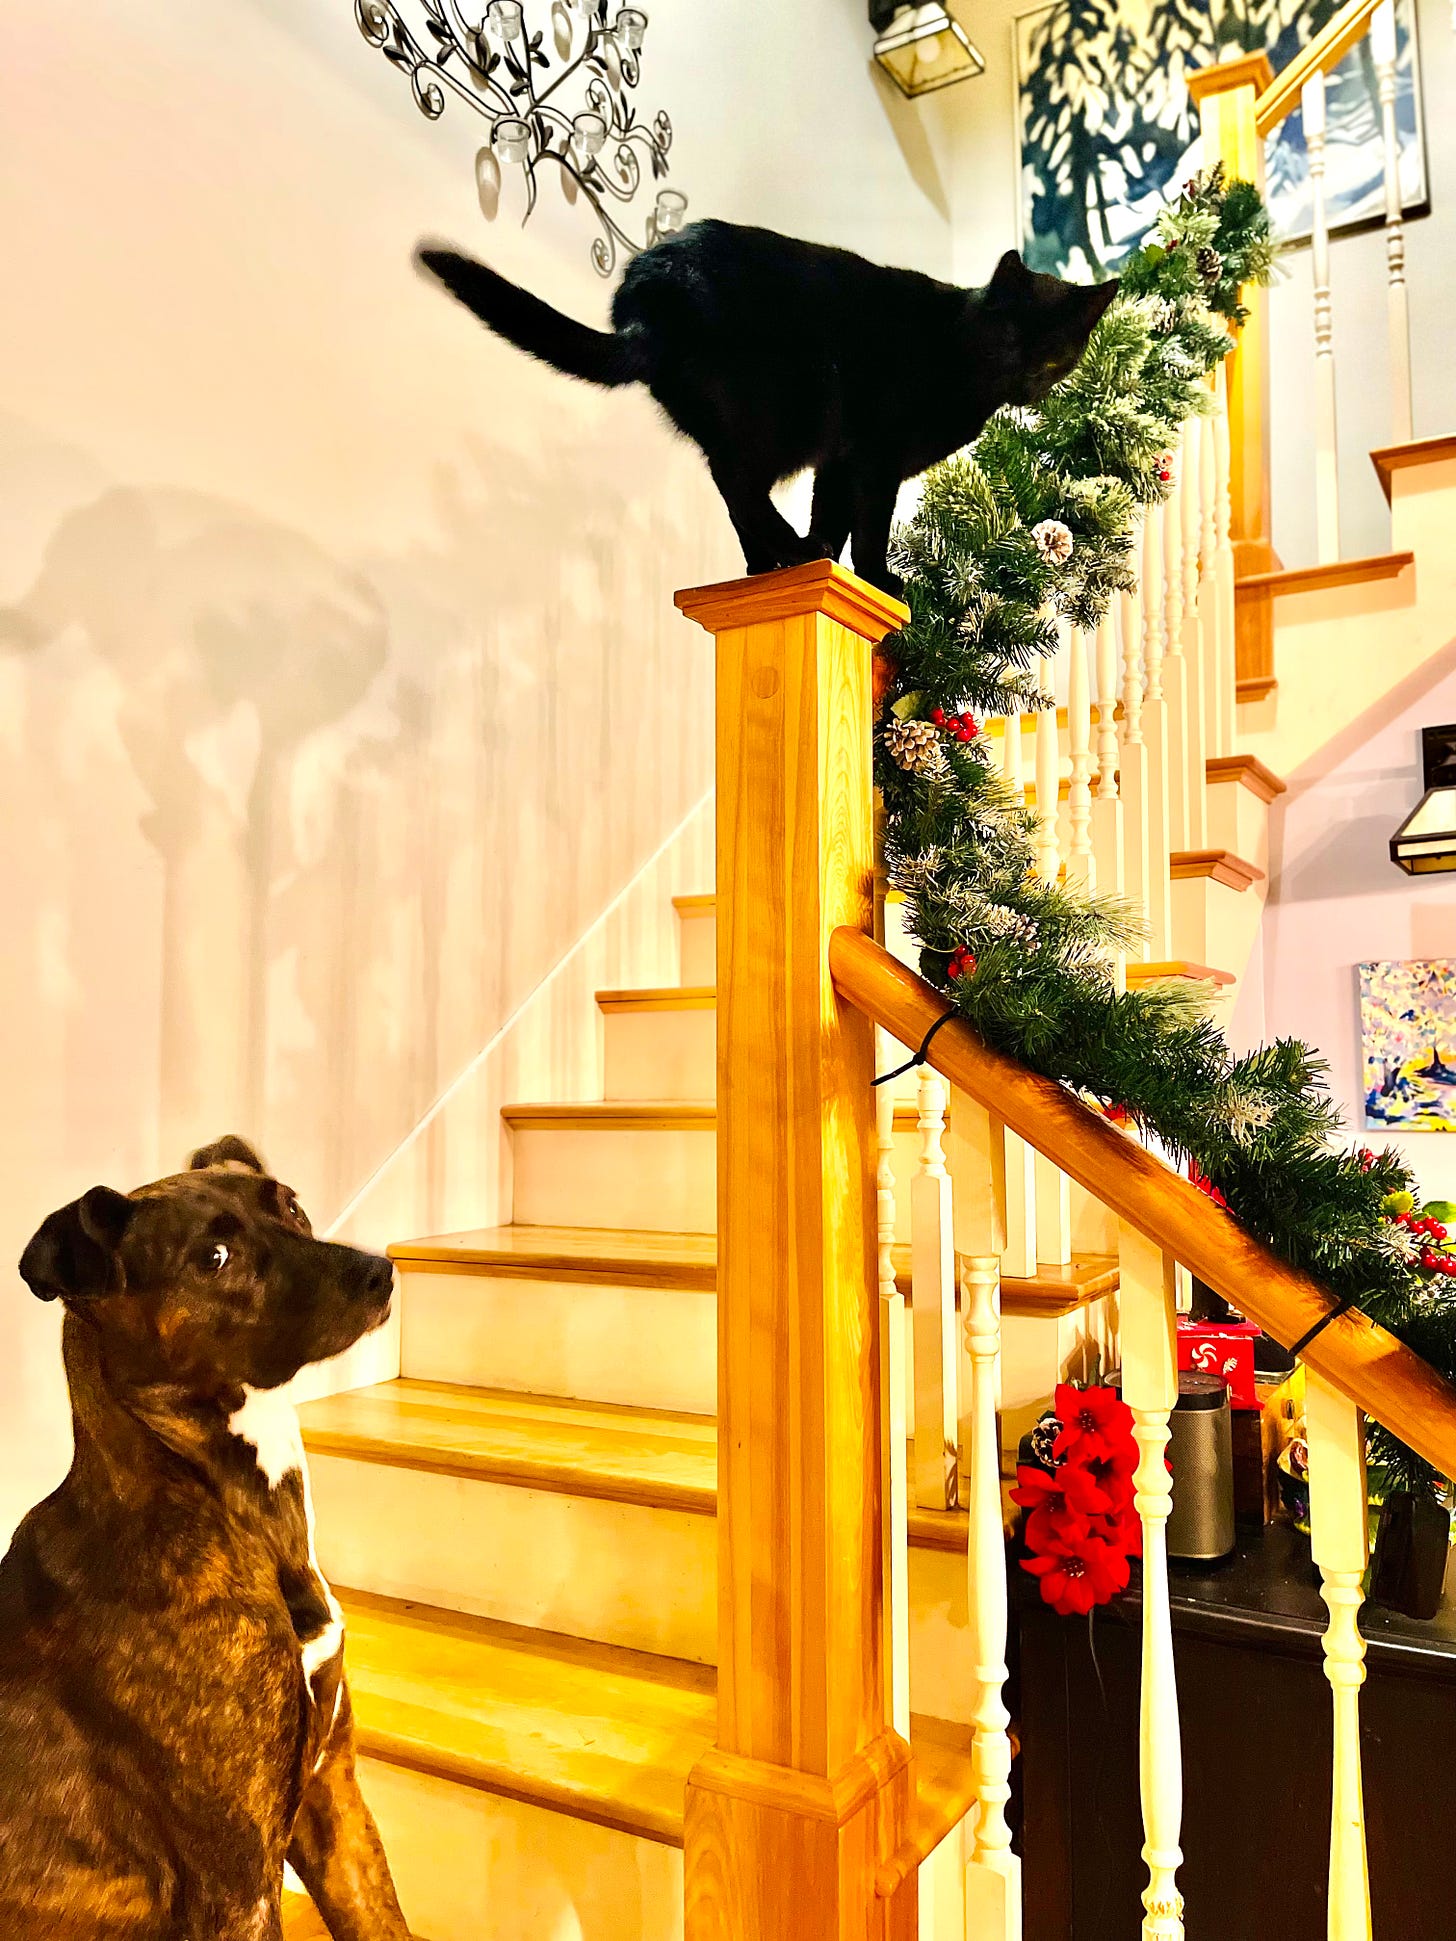 dog throwing shade at cat on bannister